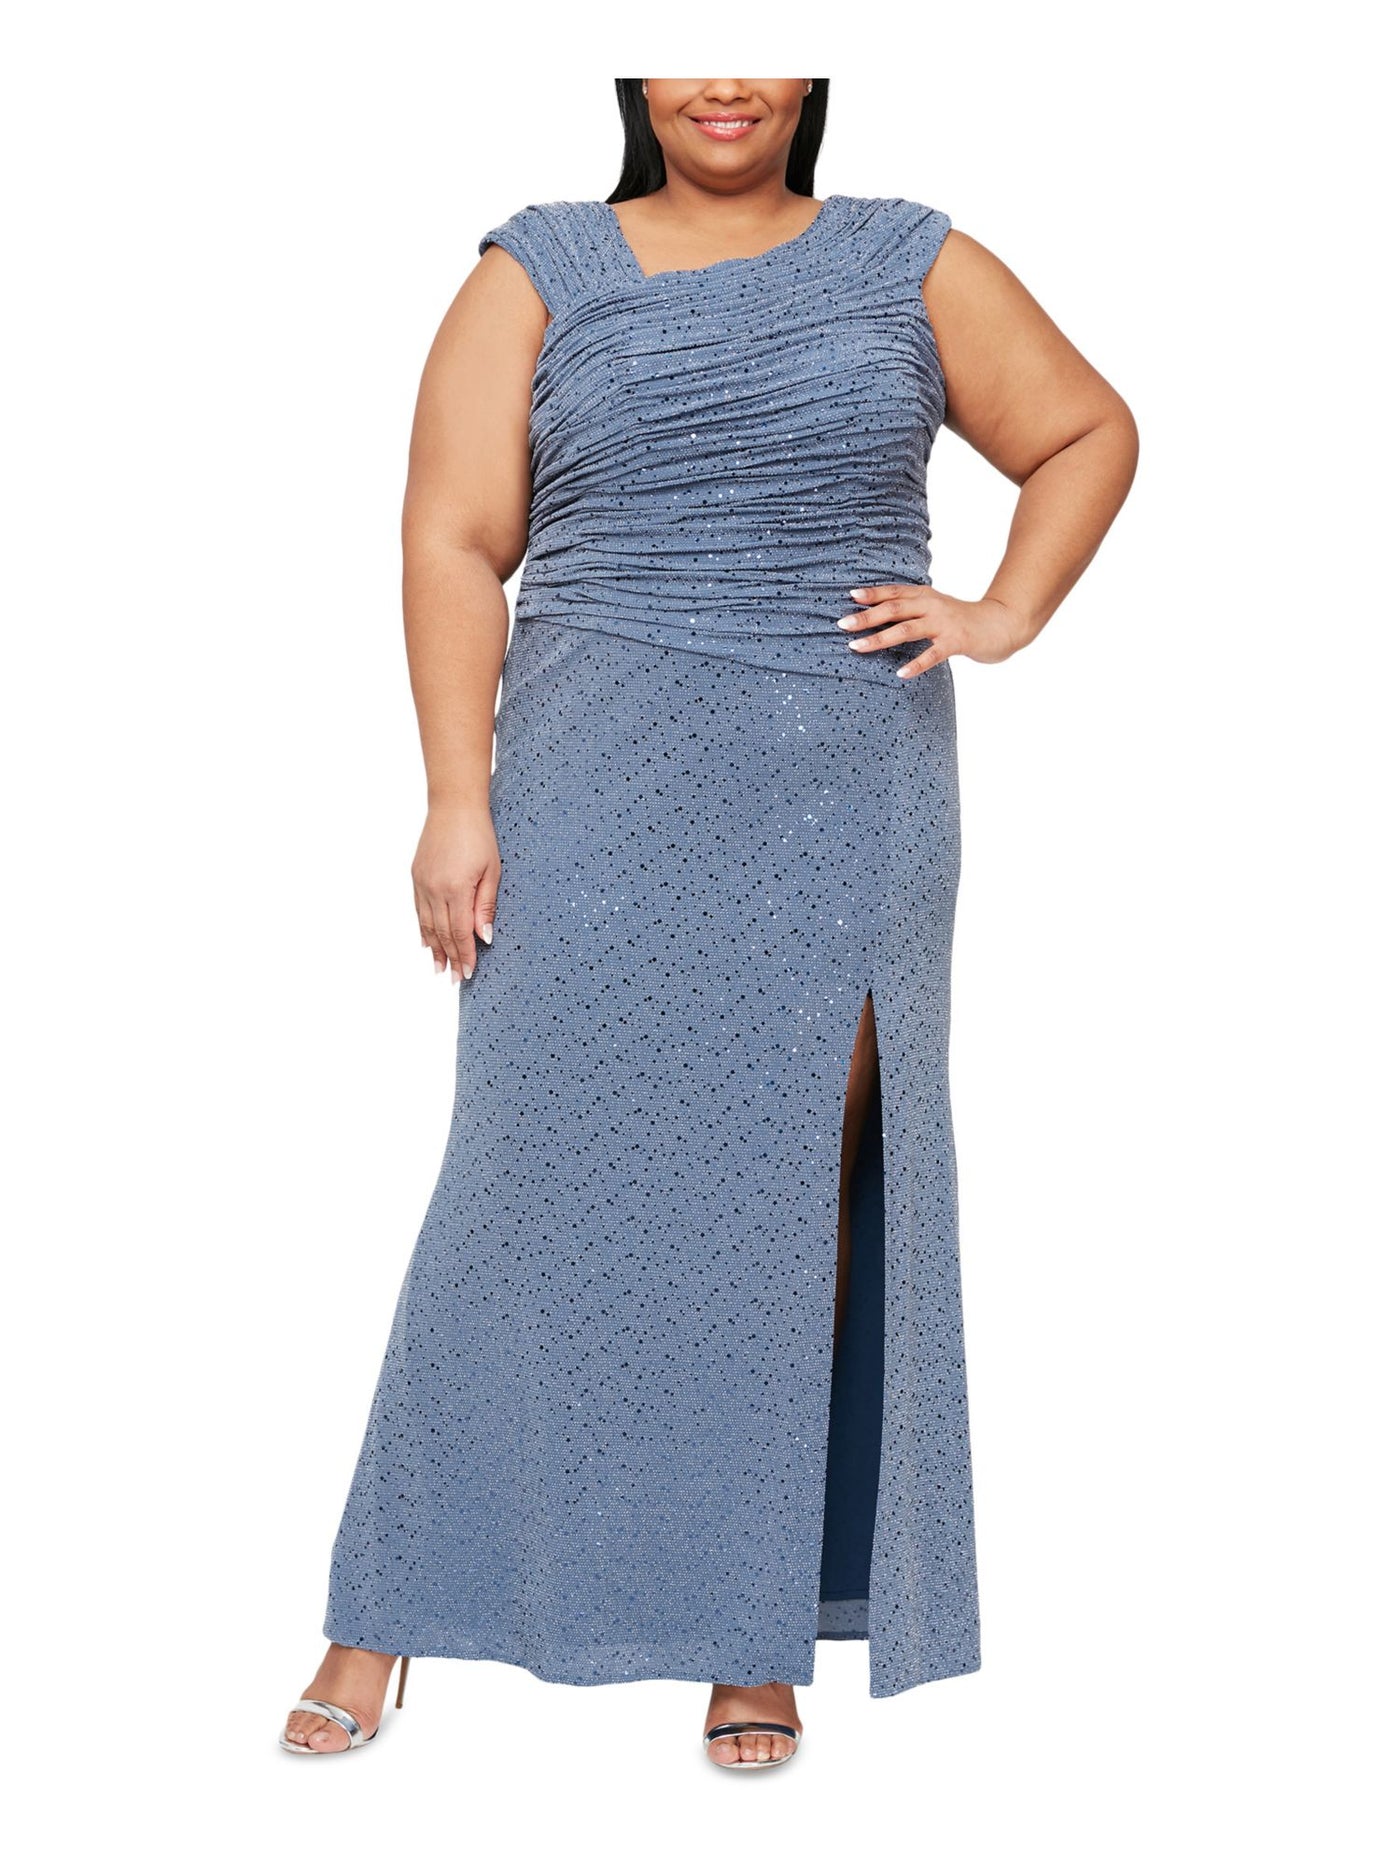 ALEX EVENINGS WOMAN Womens Blue Slitted Zippered Ruched Lined Embellished Sleeveless Asymmetrical Neckline Full-Length Evening Gown Dress Plus 20W